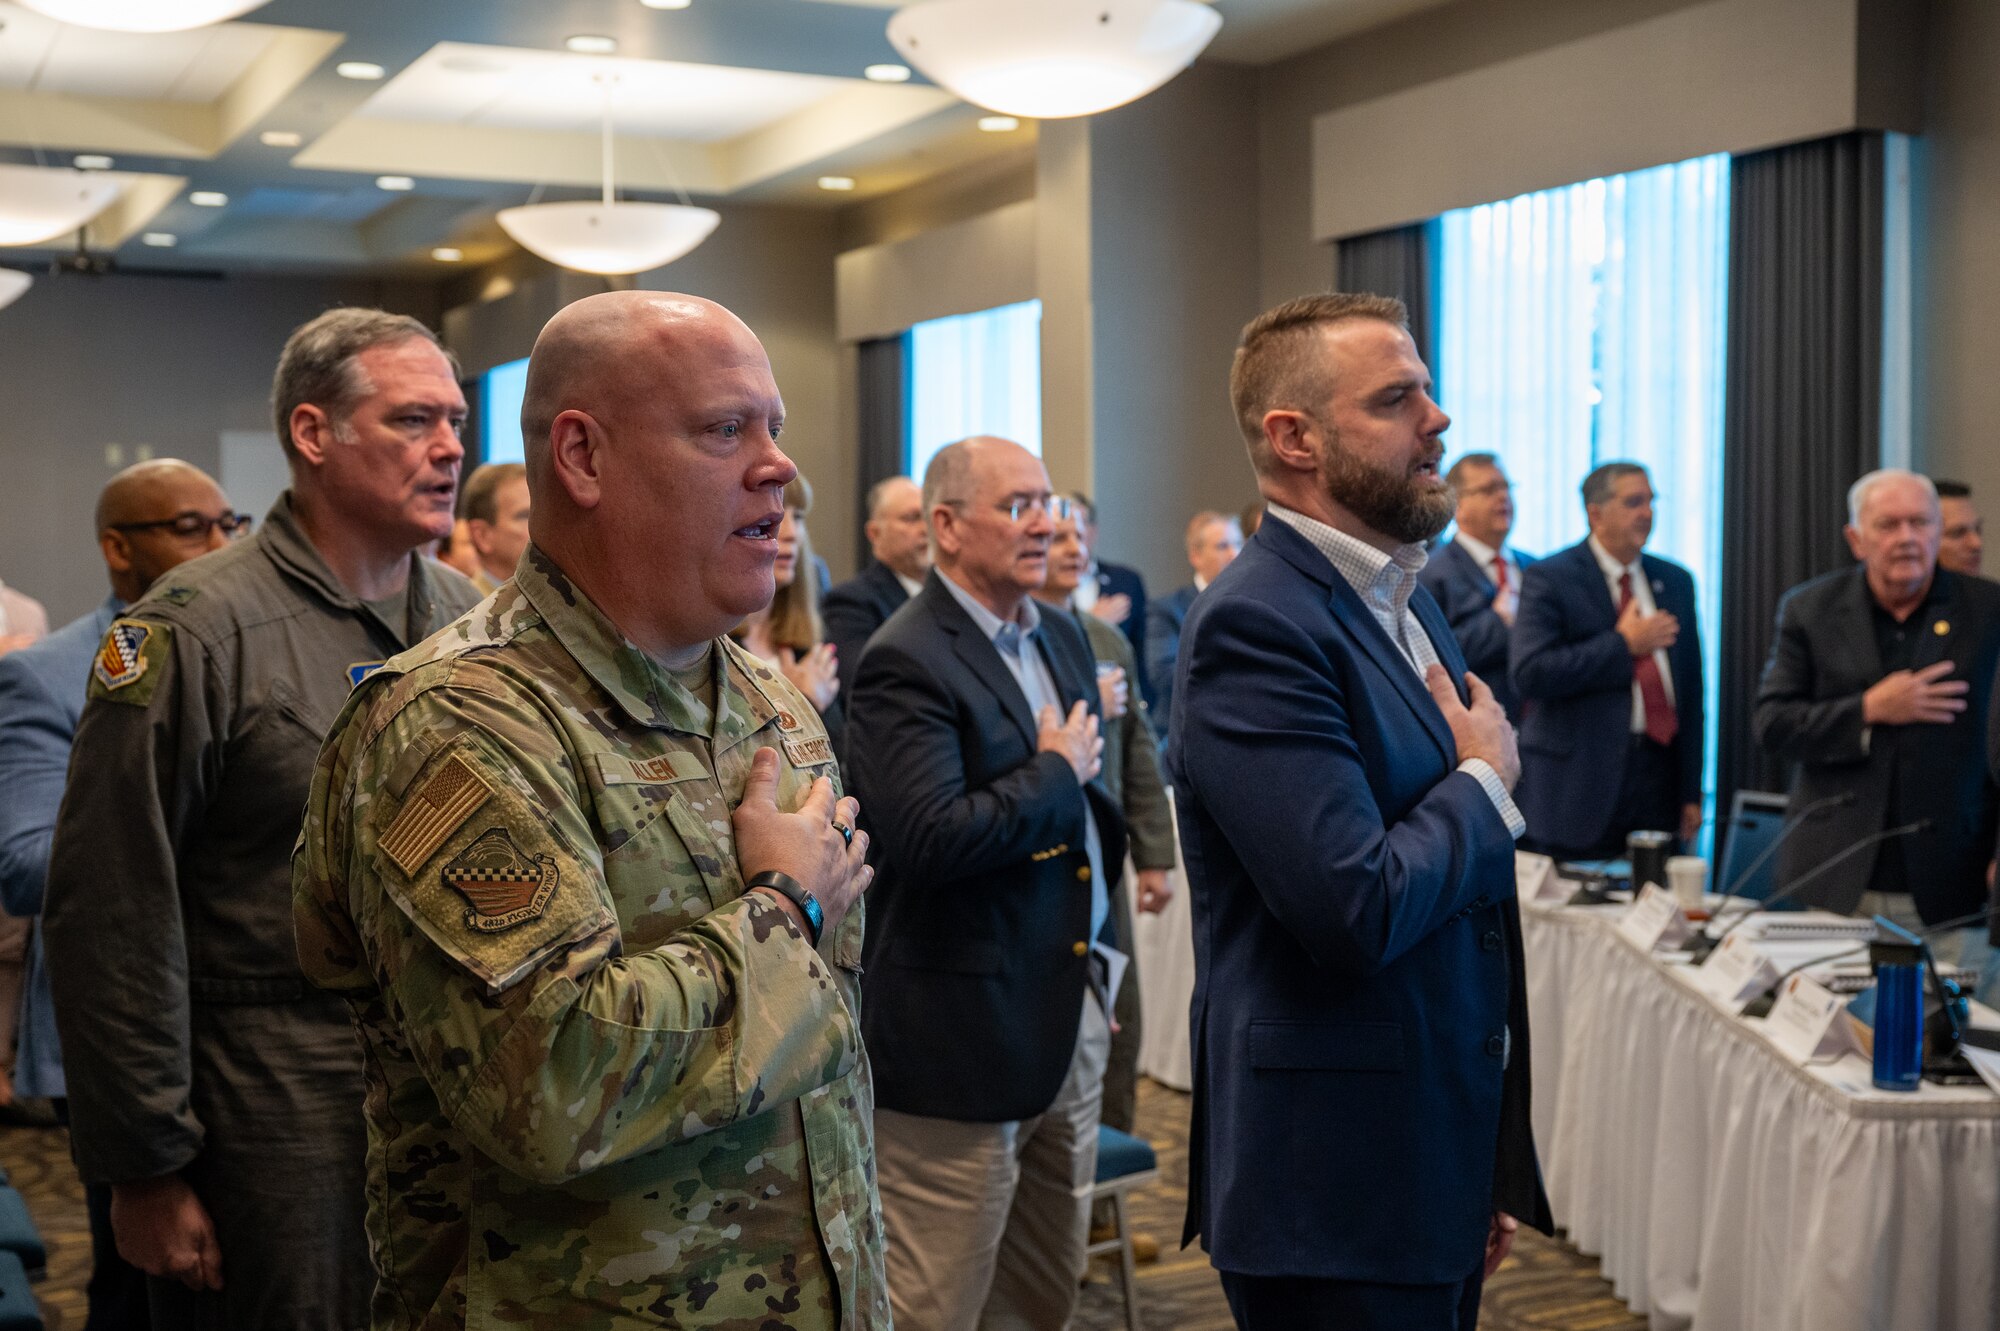 Chief Master Sgt. Jeremy Allen, 482d Fighter Wing Command Chief, leads the pledge of allegiance to open the significant meeting with the Florida Defense Support Task Force in Homestead, Fla. Sept. 21, 2023.